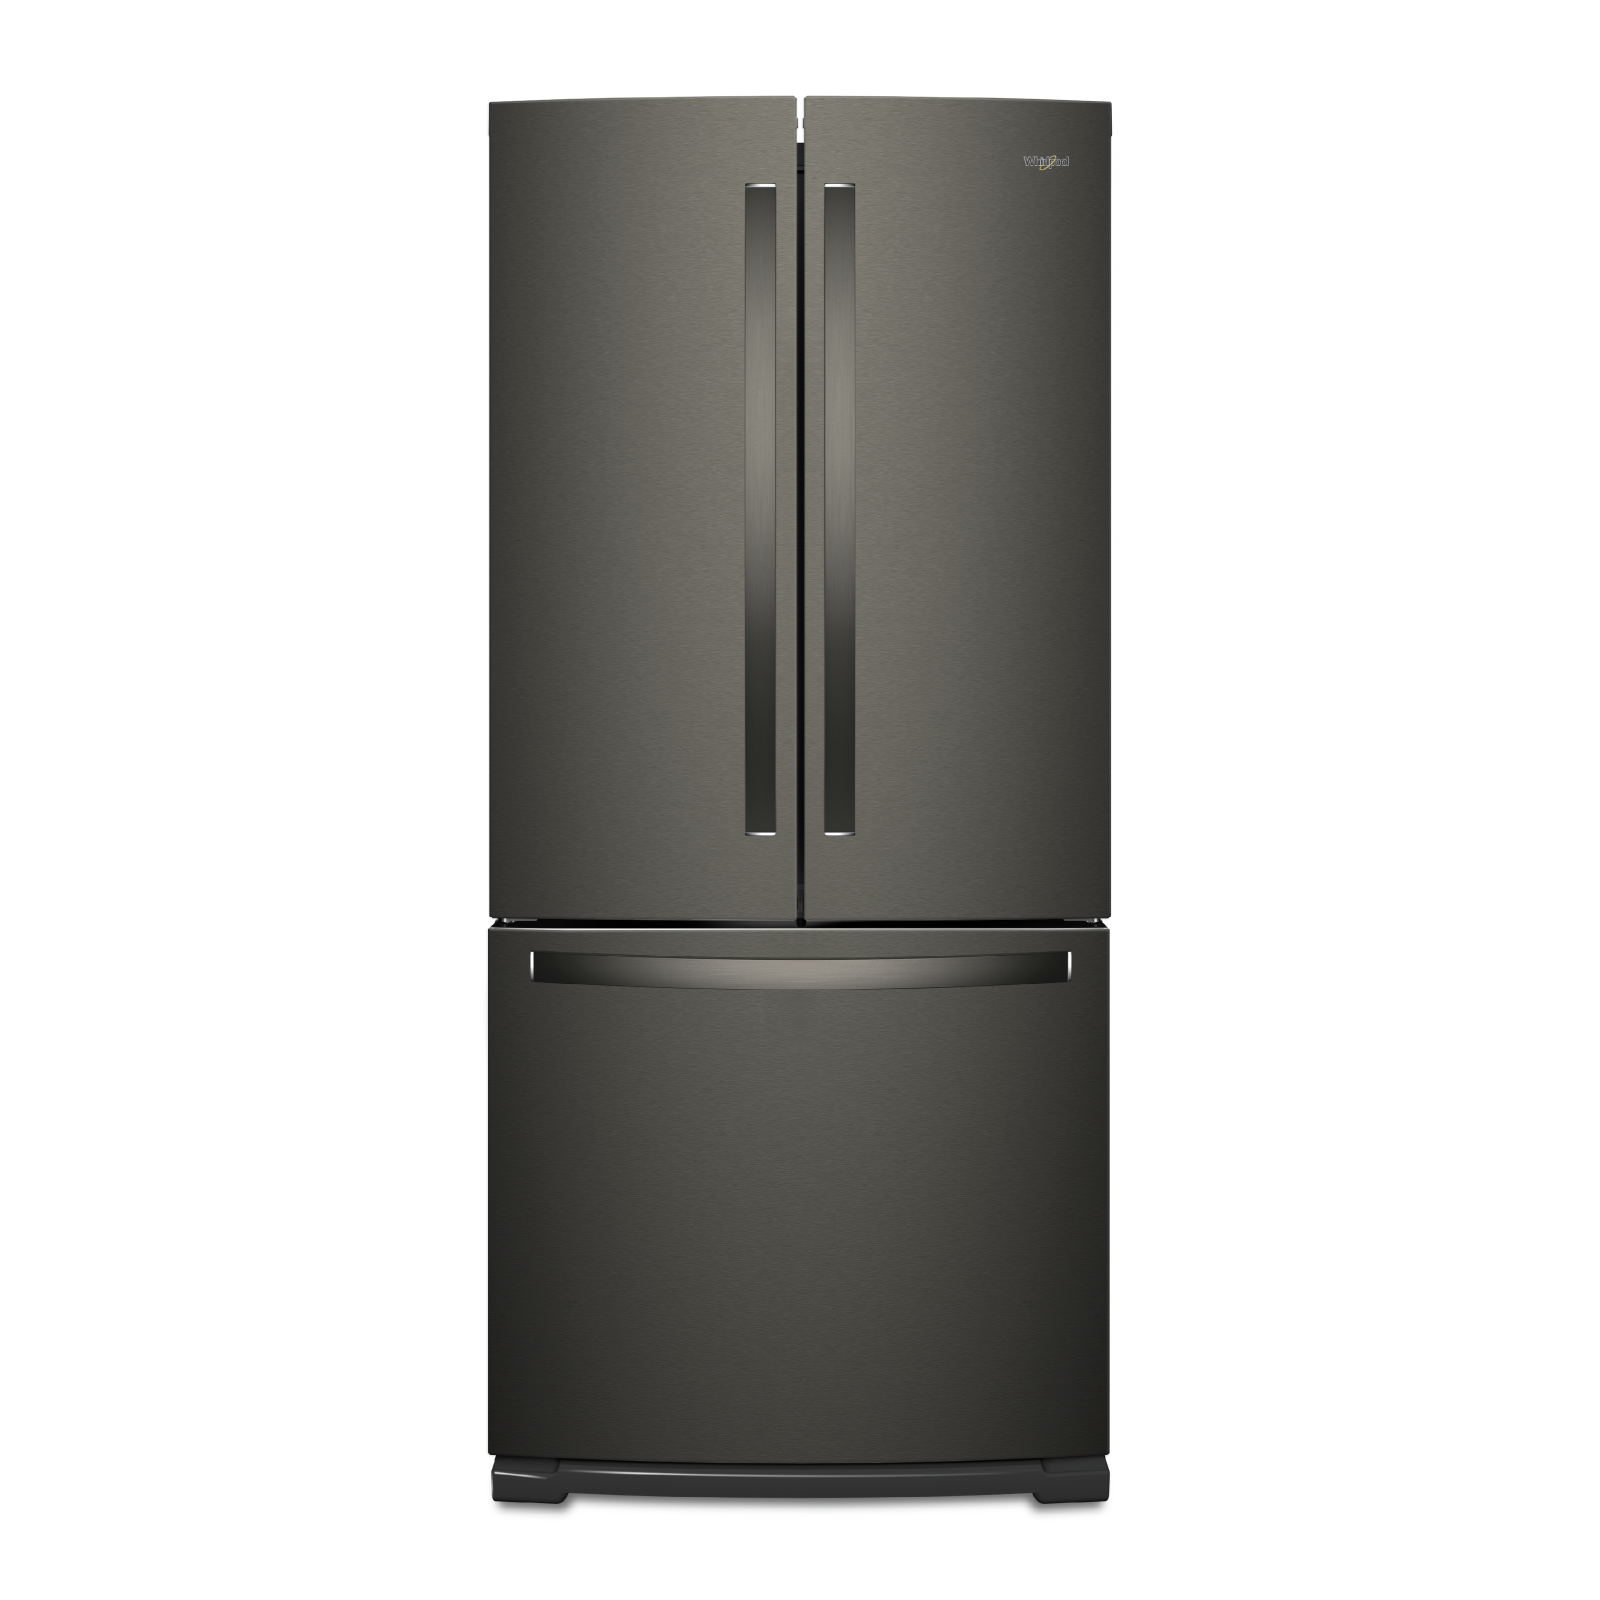 Whirlpool - 34.63 Inch 19.68 cu. ft French Door Refrigerator in Black Stainless - WRF560SFHV